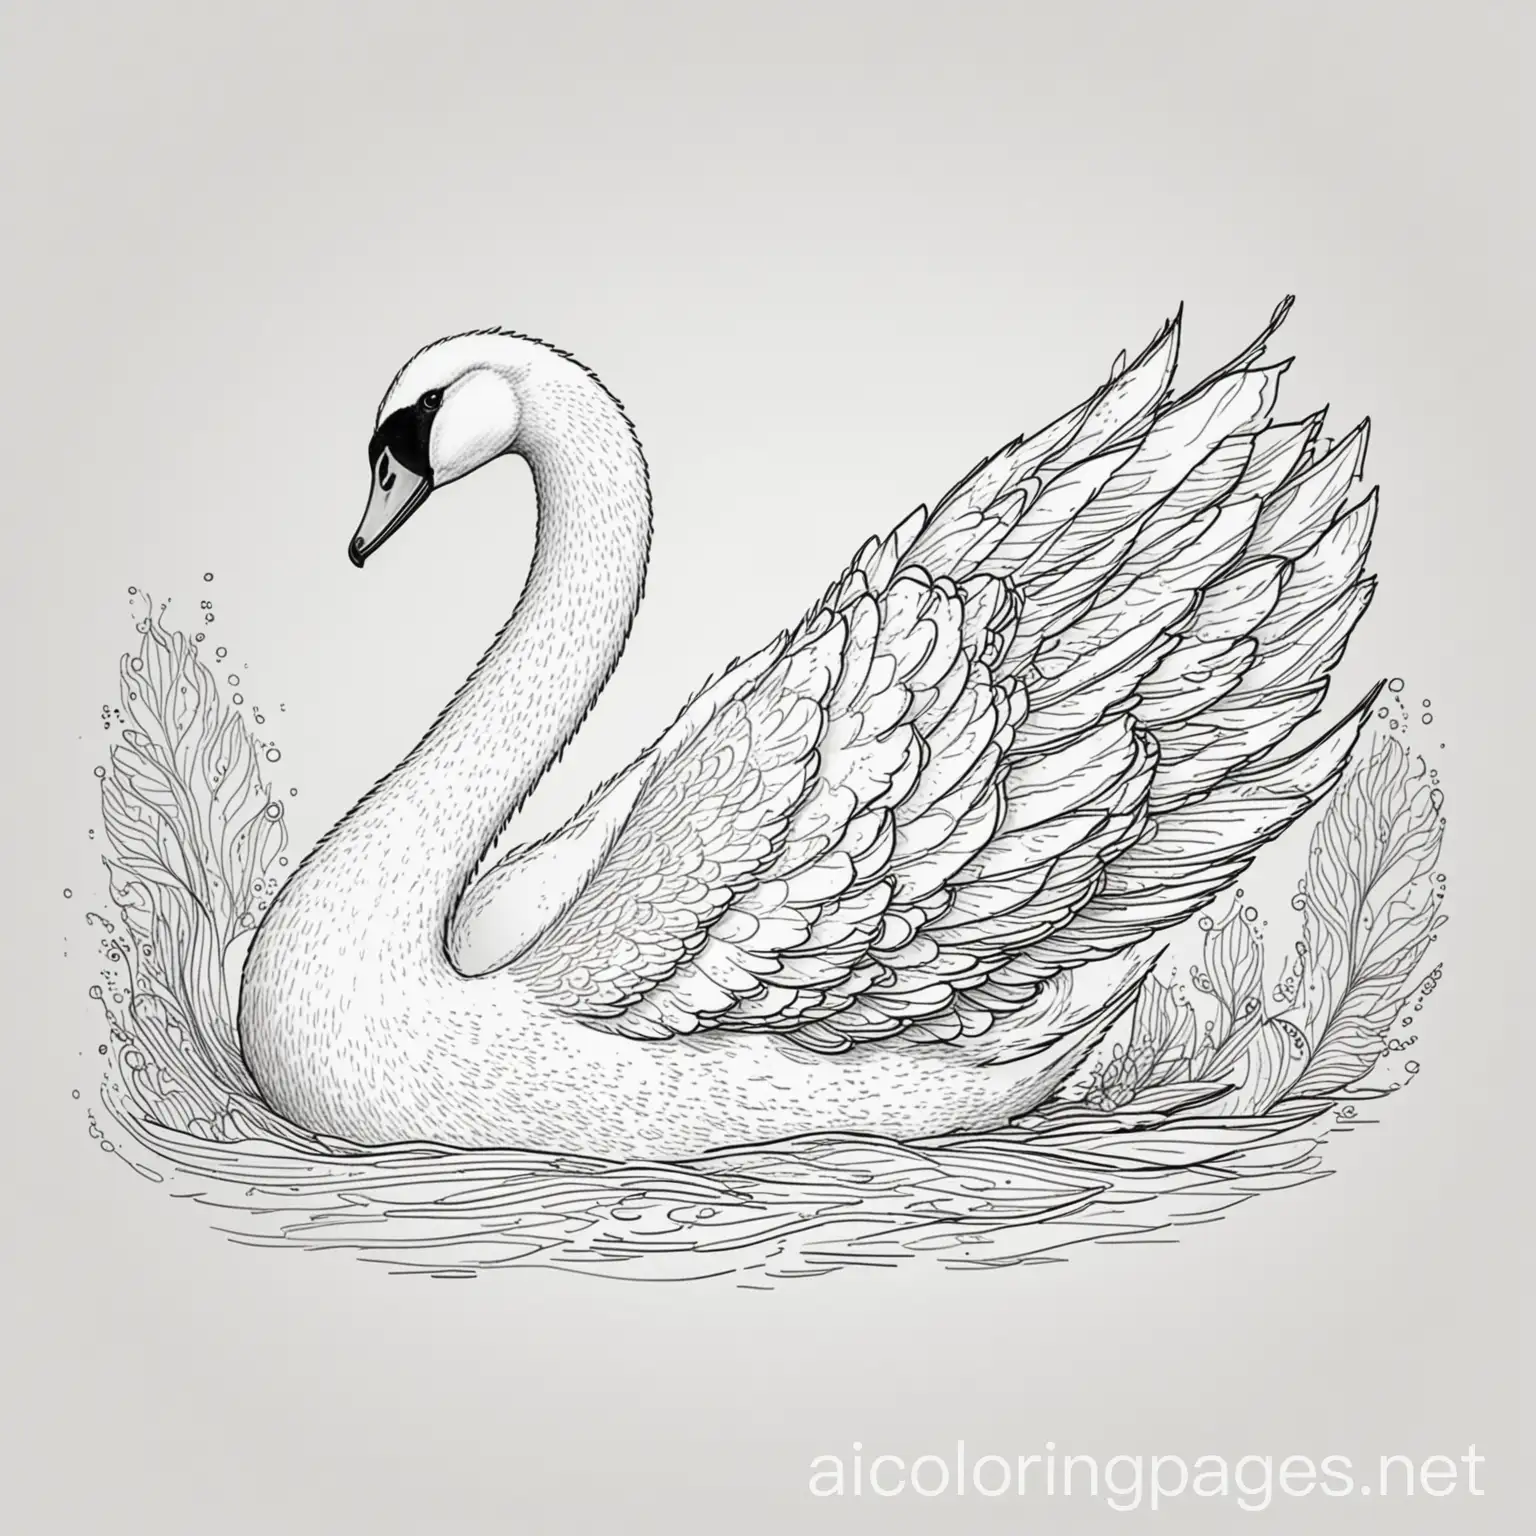 Elegant-Swan-Coloring-Page-Minimalistic-Line-Art-on-White-Background